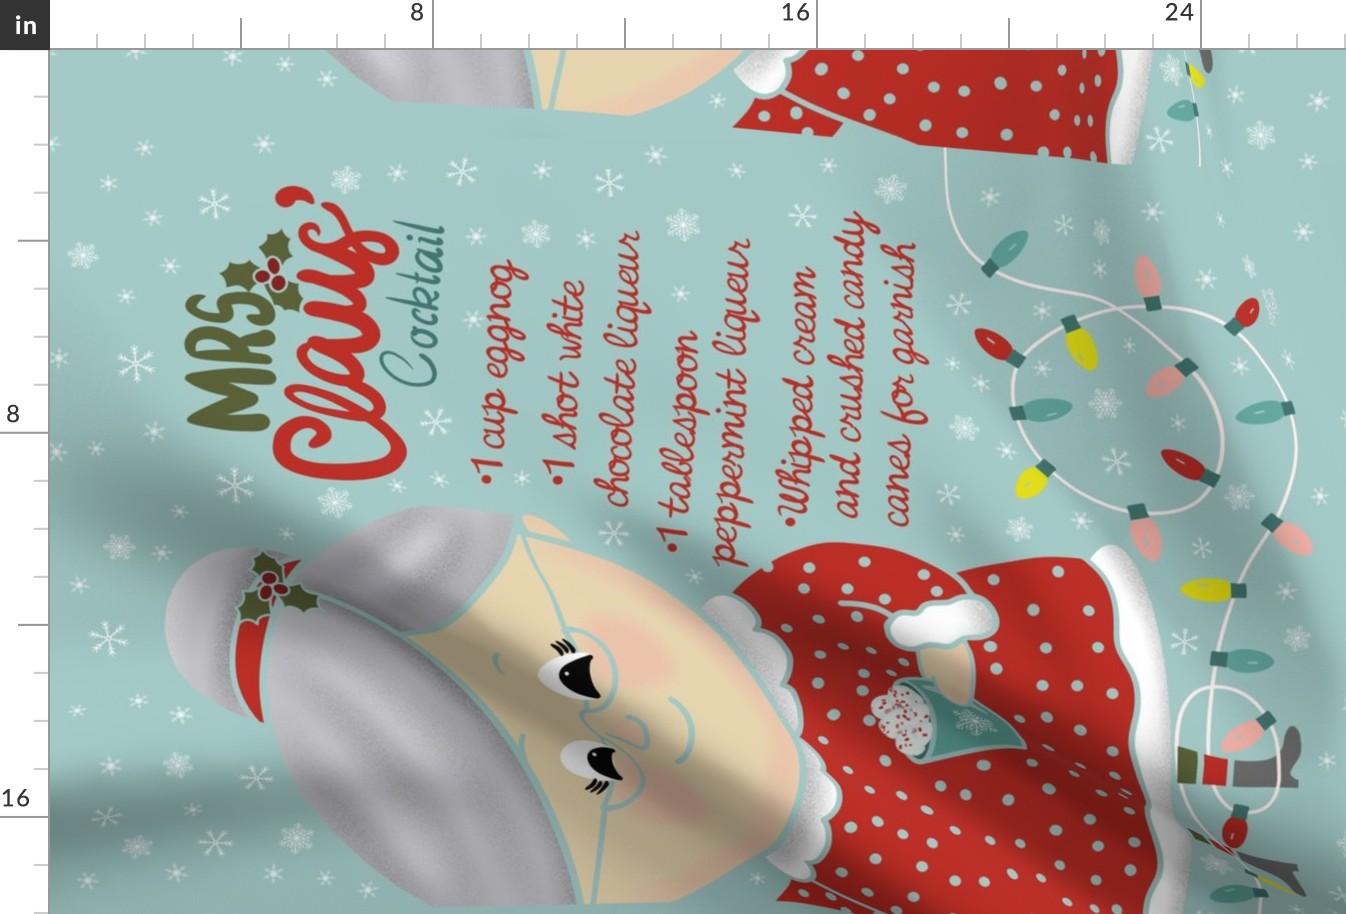 Mrs. Claus’ Cocktail Tea Towel/Wall Hanging